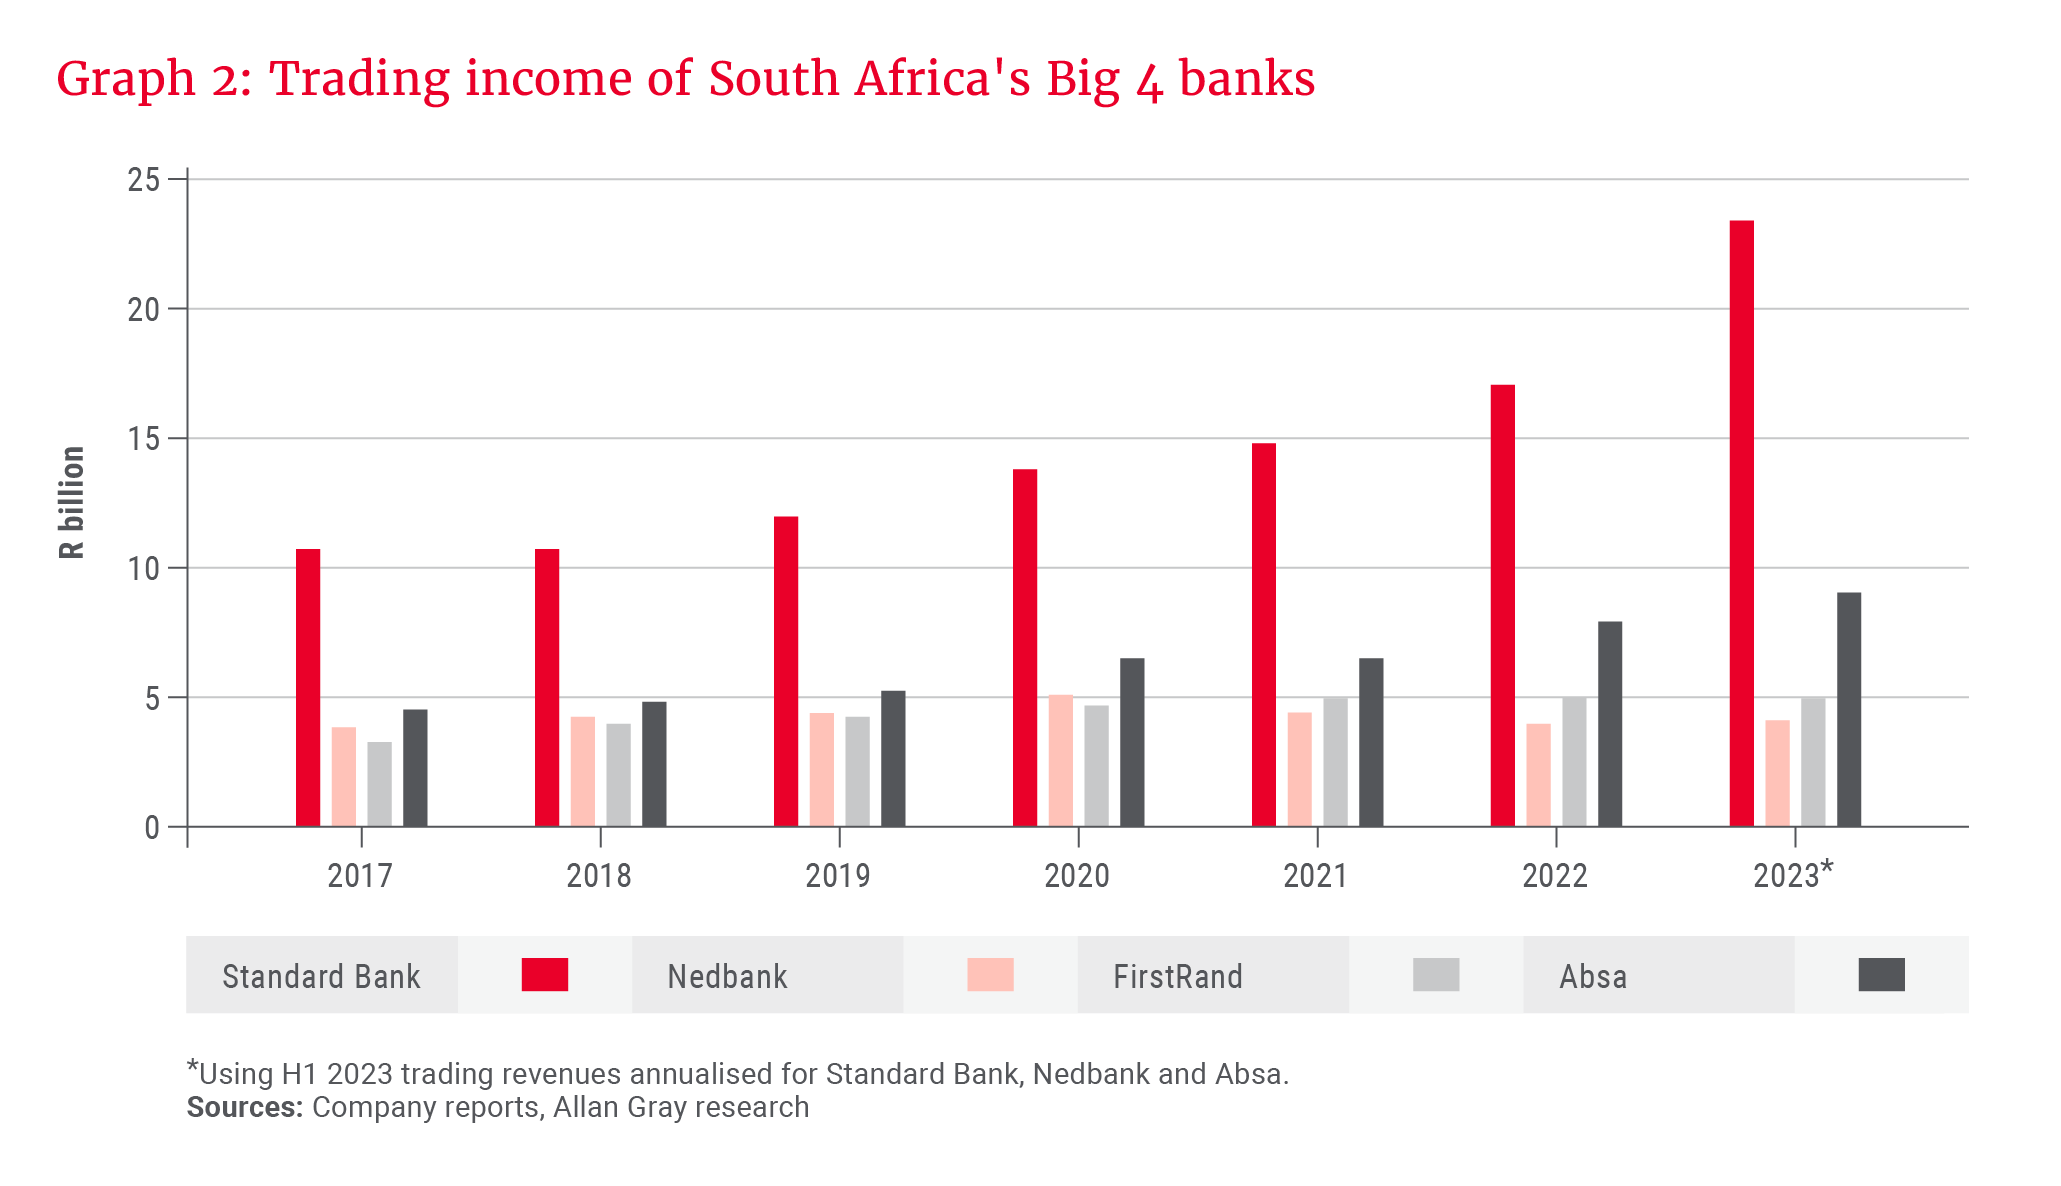 Graph 2_Trading income of South Africa's Big 4 banks_300dpi.png